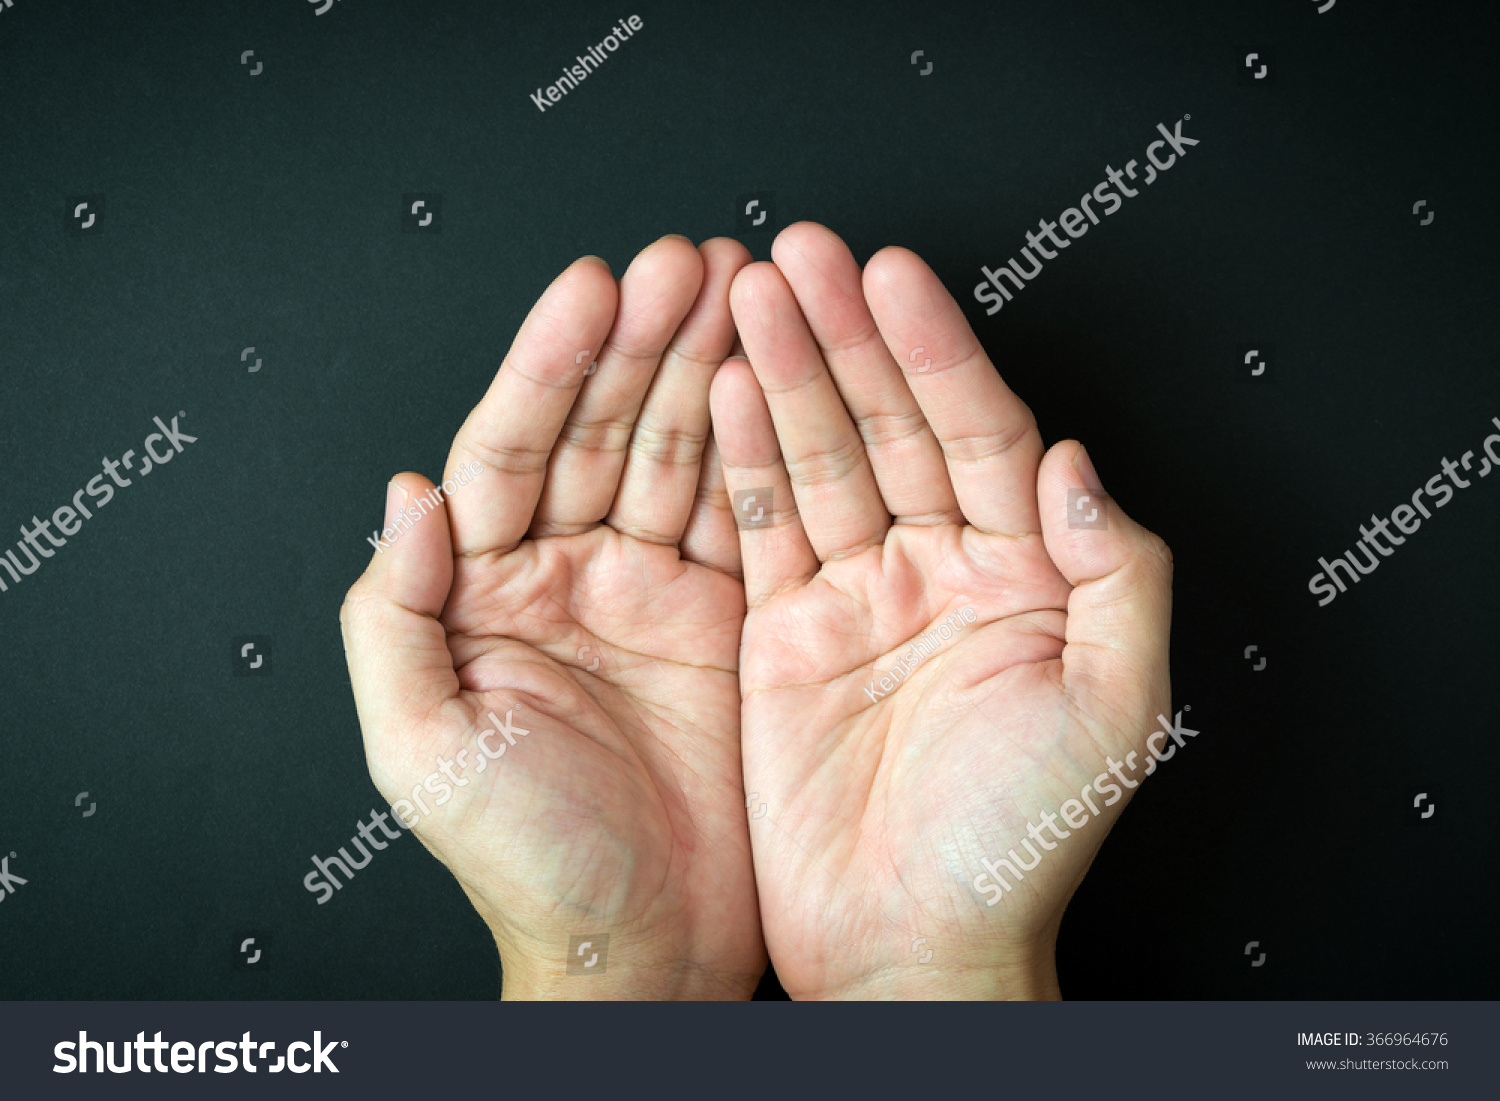 Close Empty Cupped Hand Palms On Stock Photo 366964676 Shutterstock